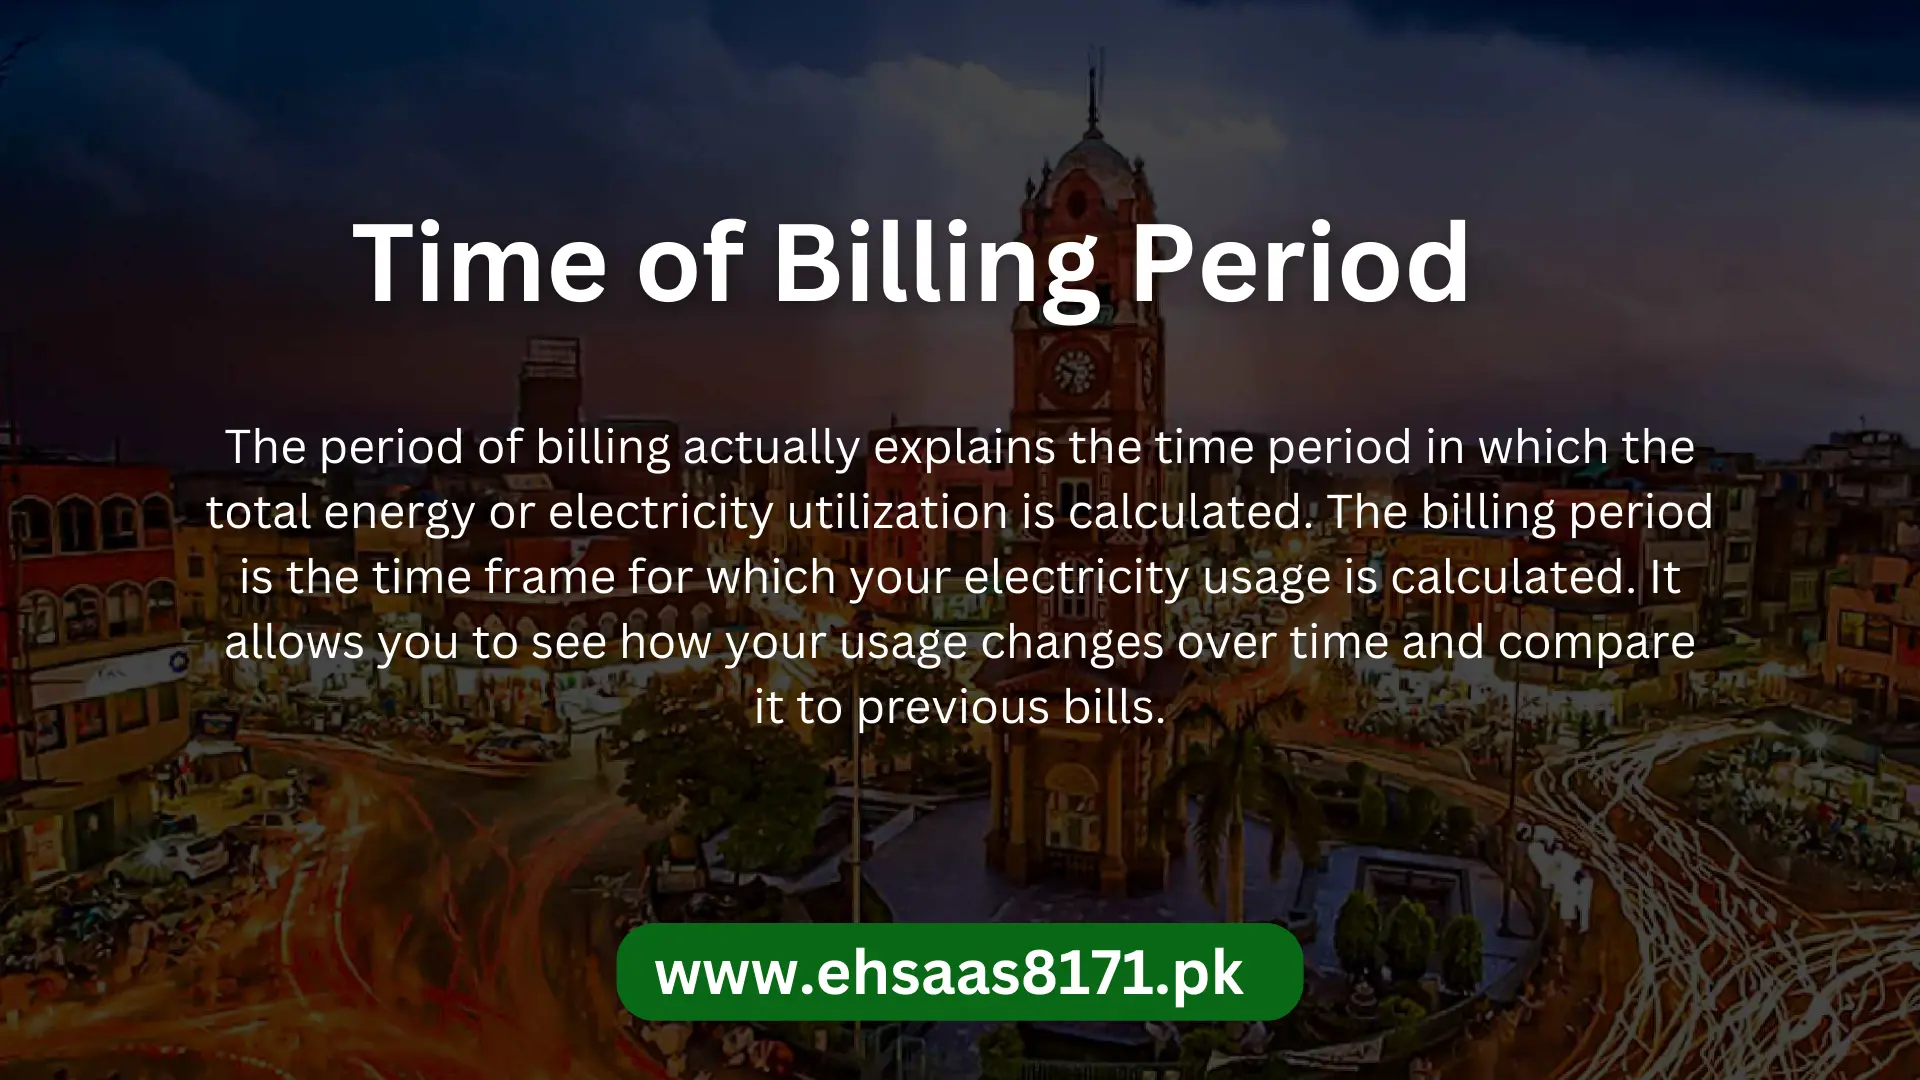 Time of Billing Period